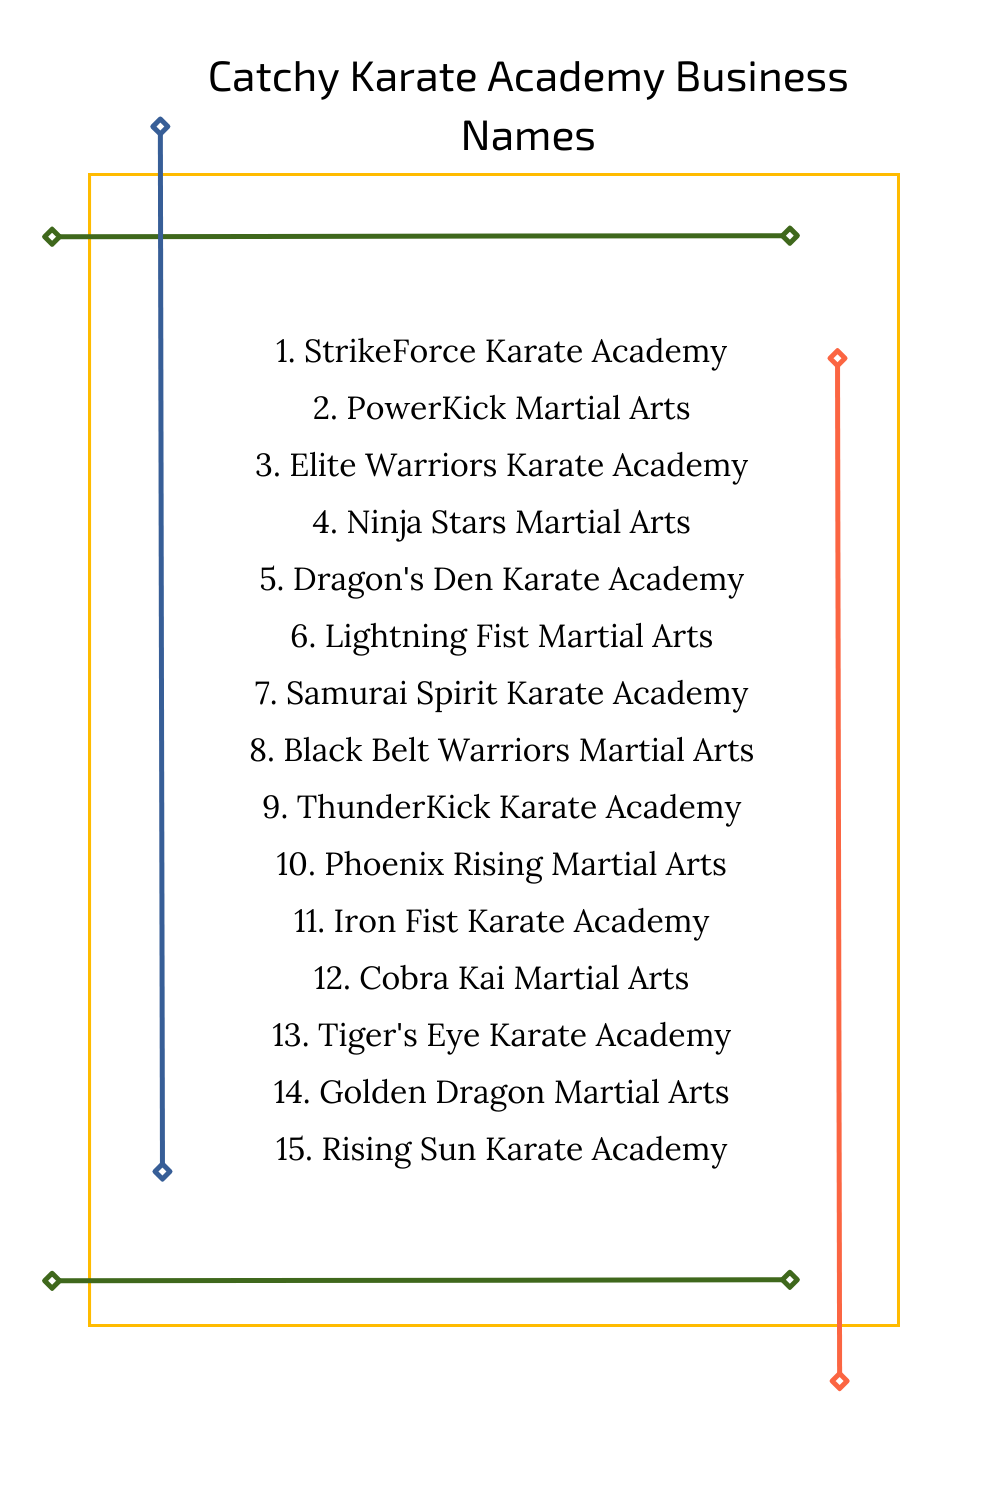 Catchy Karate Academy Business Names